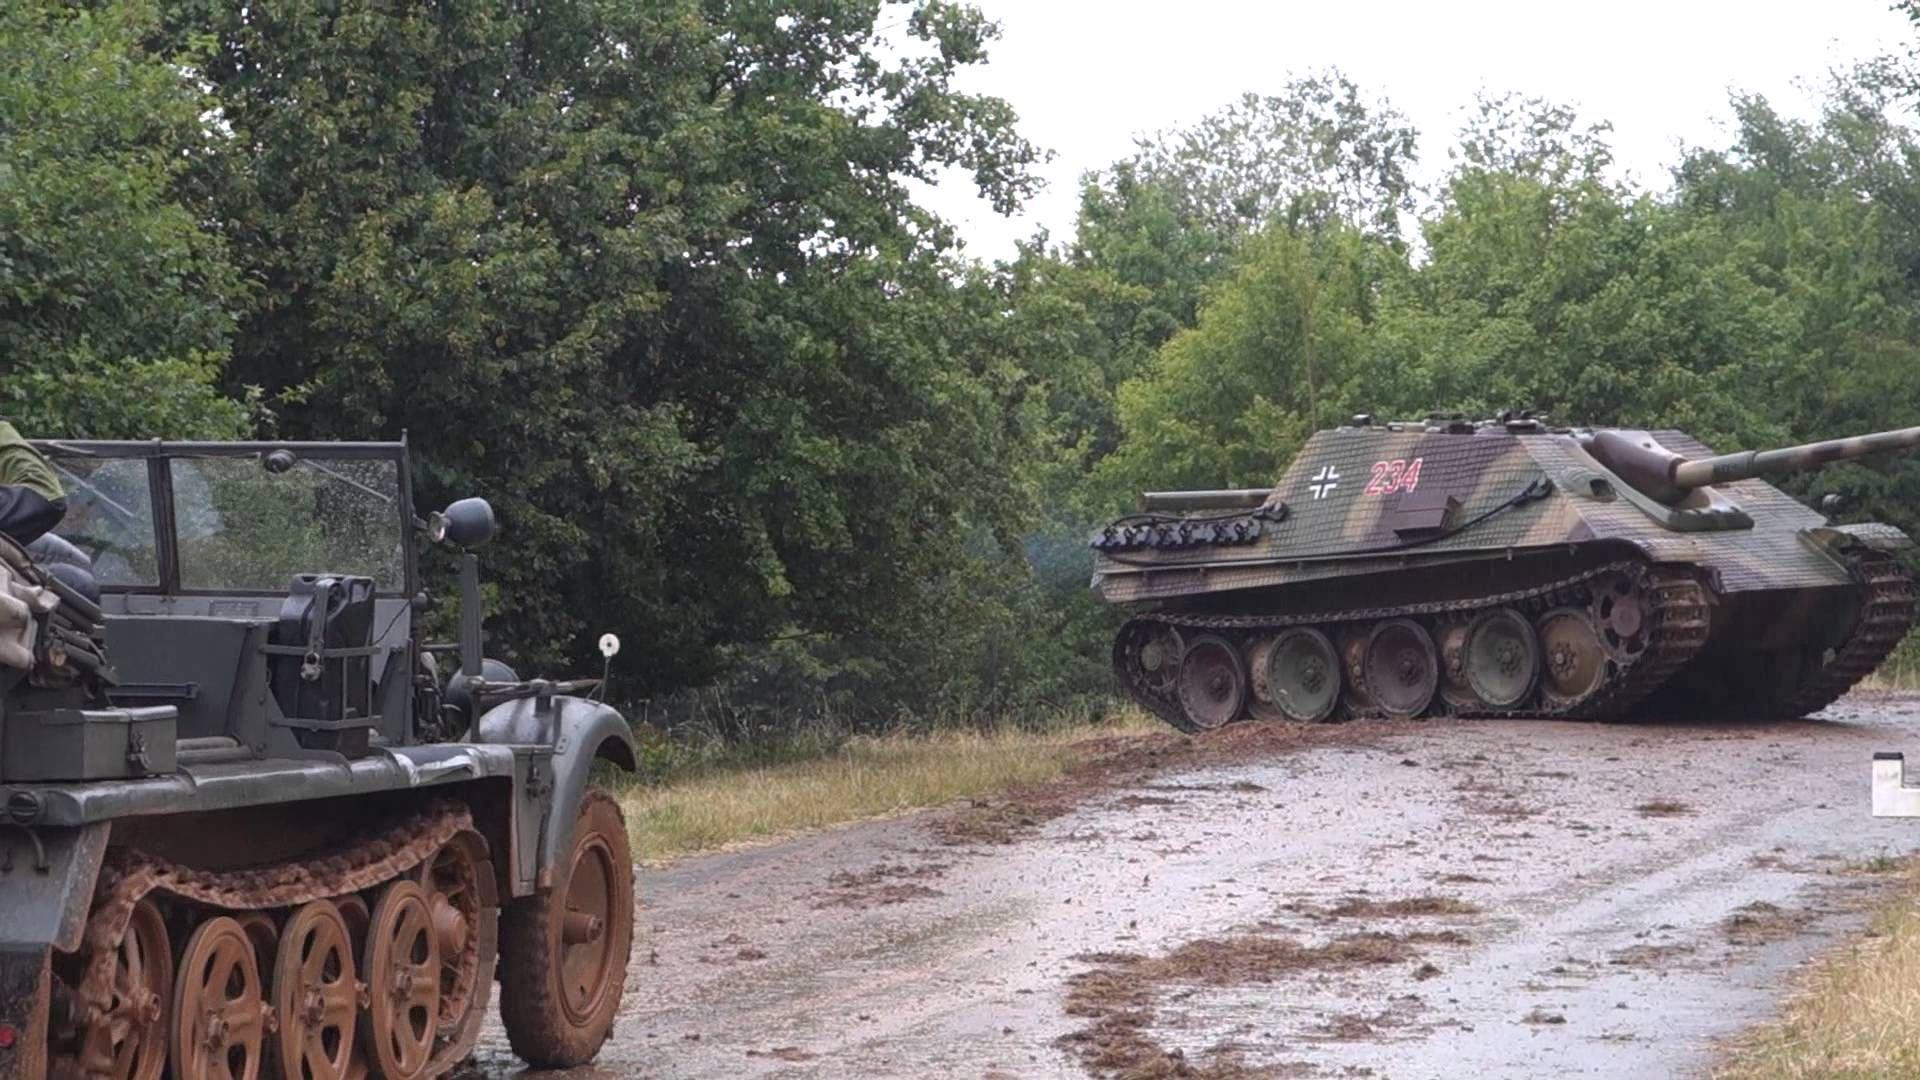 jagdpanther and halftrack transport in reenactment exercise